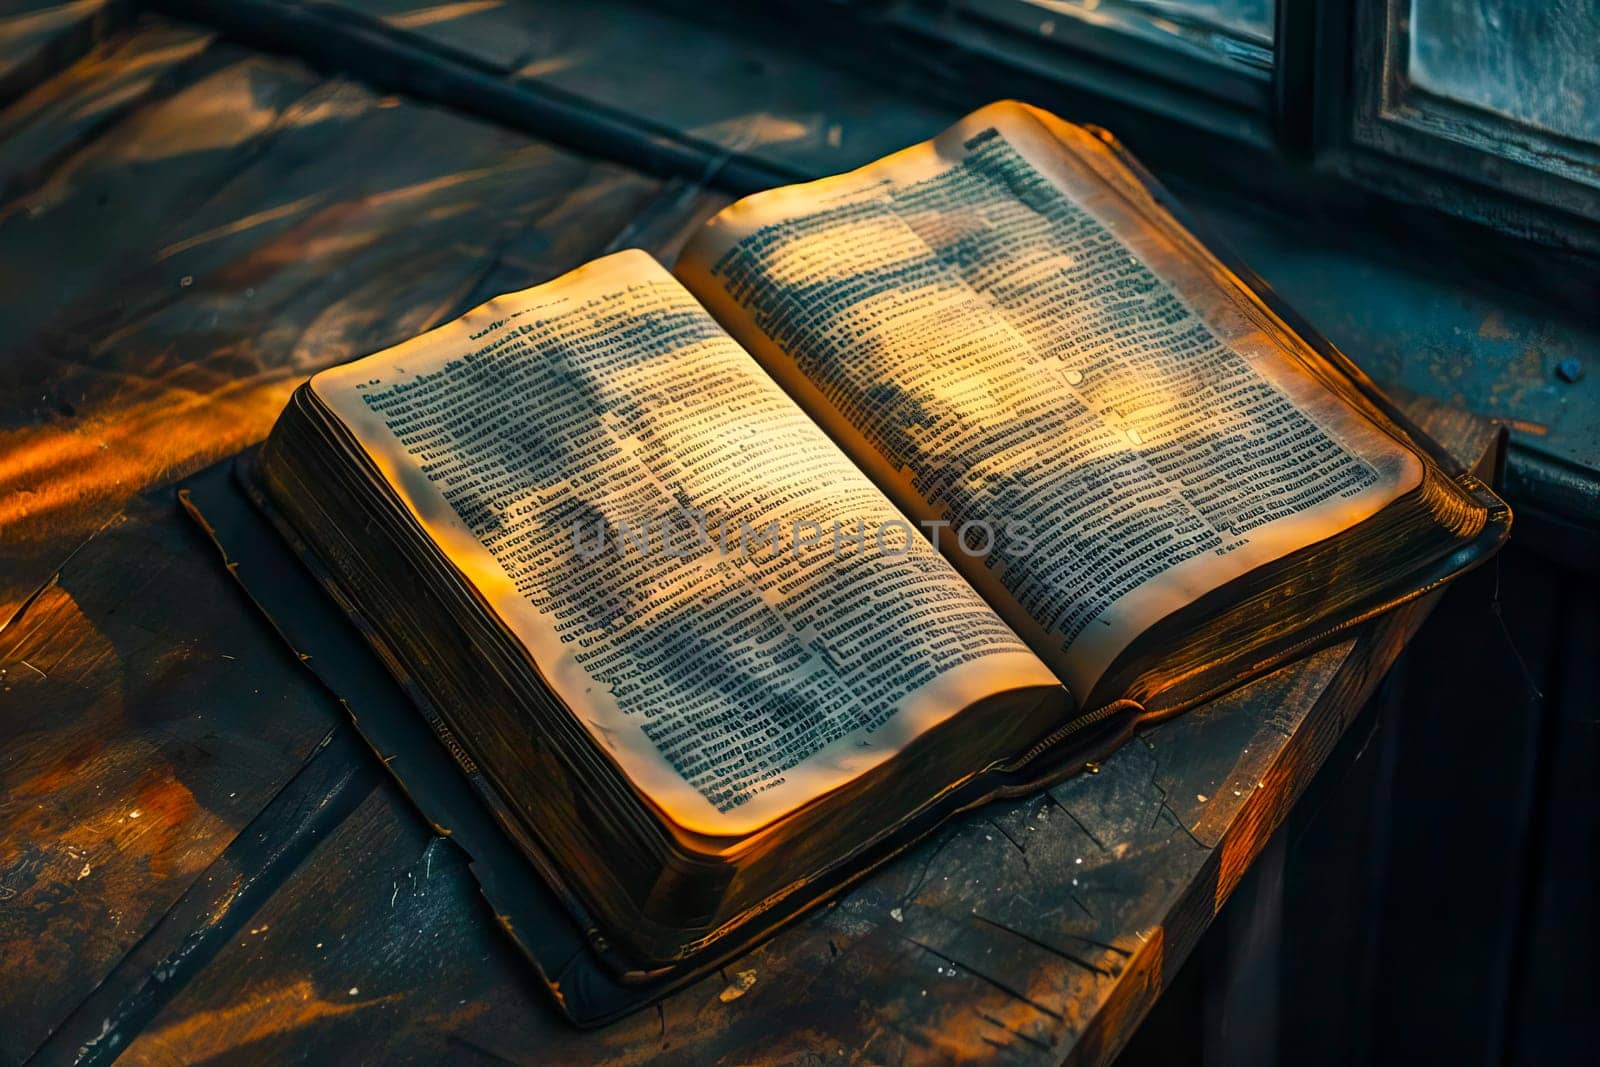 An open Holy Bible rests on a wooden table in a well-lit room. by vladimka